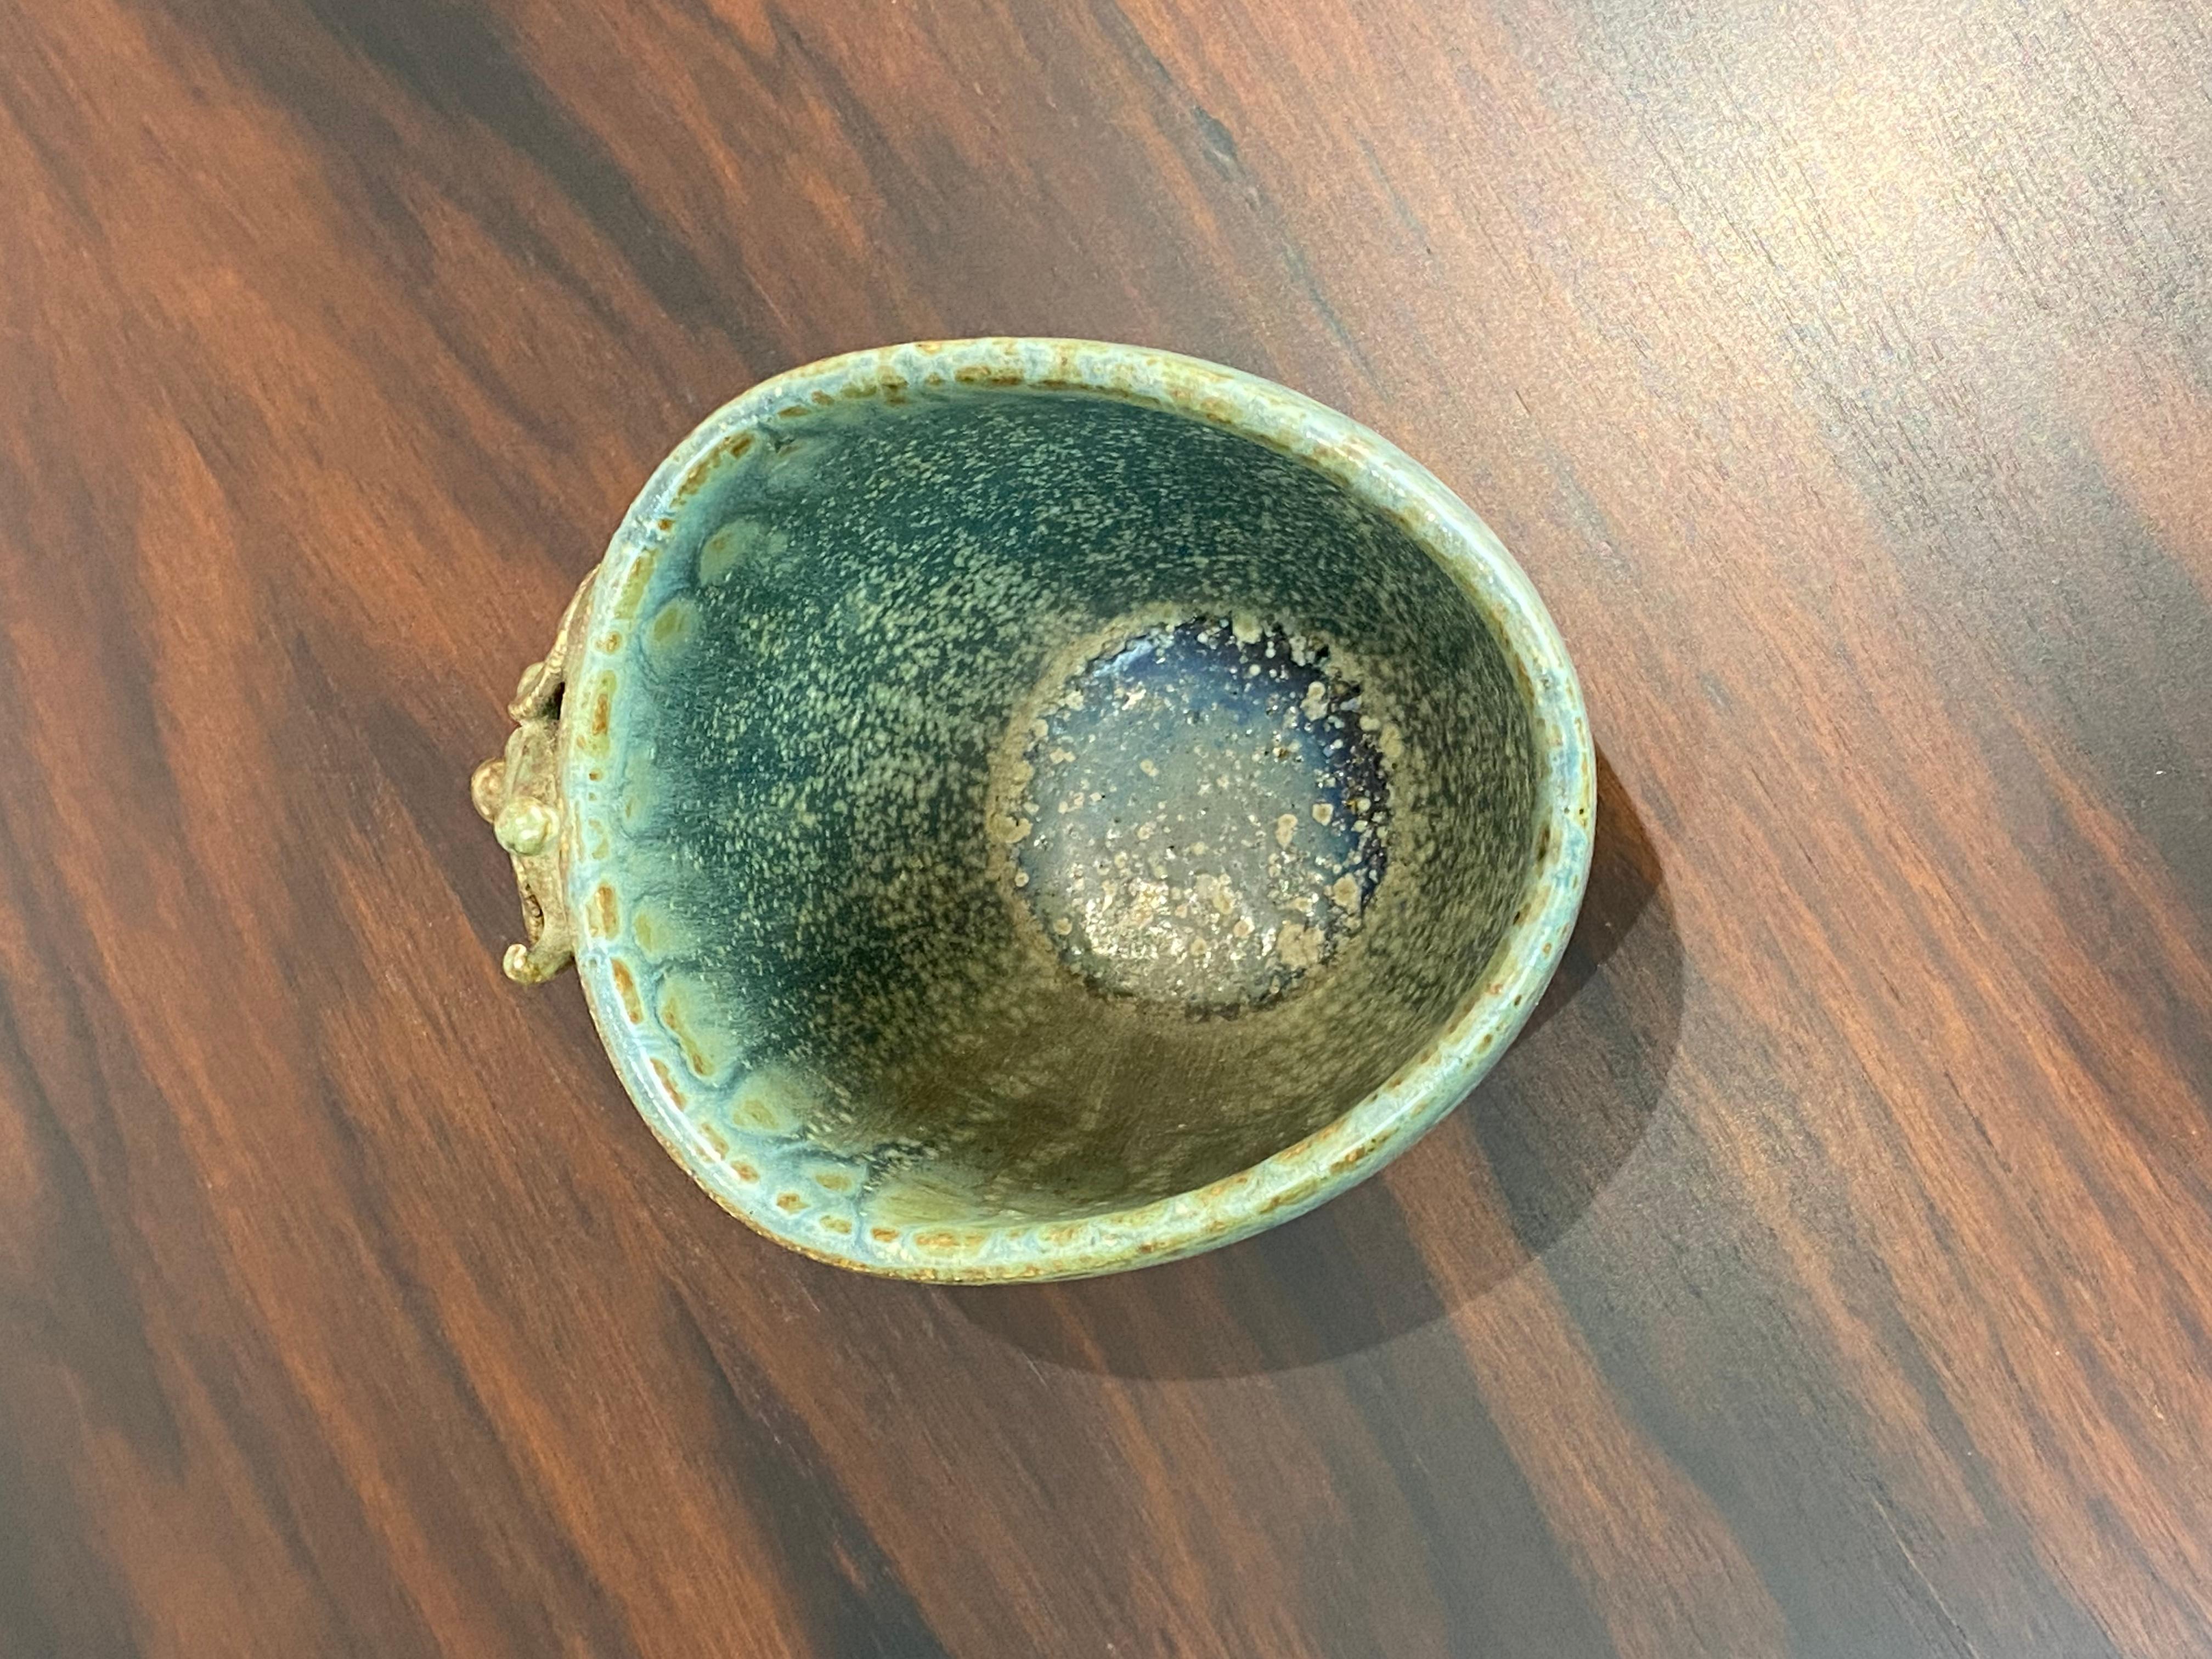 Small ceramic vase with turquoise glaze by Arne Bang. The vase is in great vintage condition.